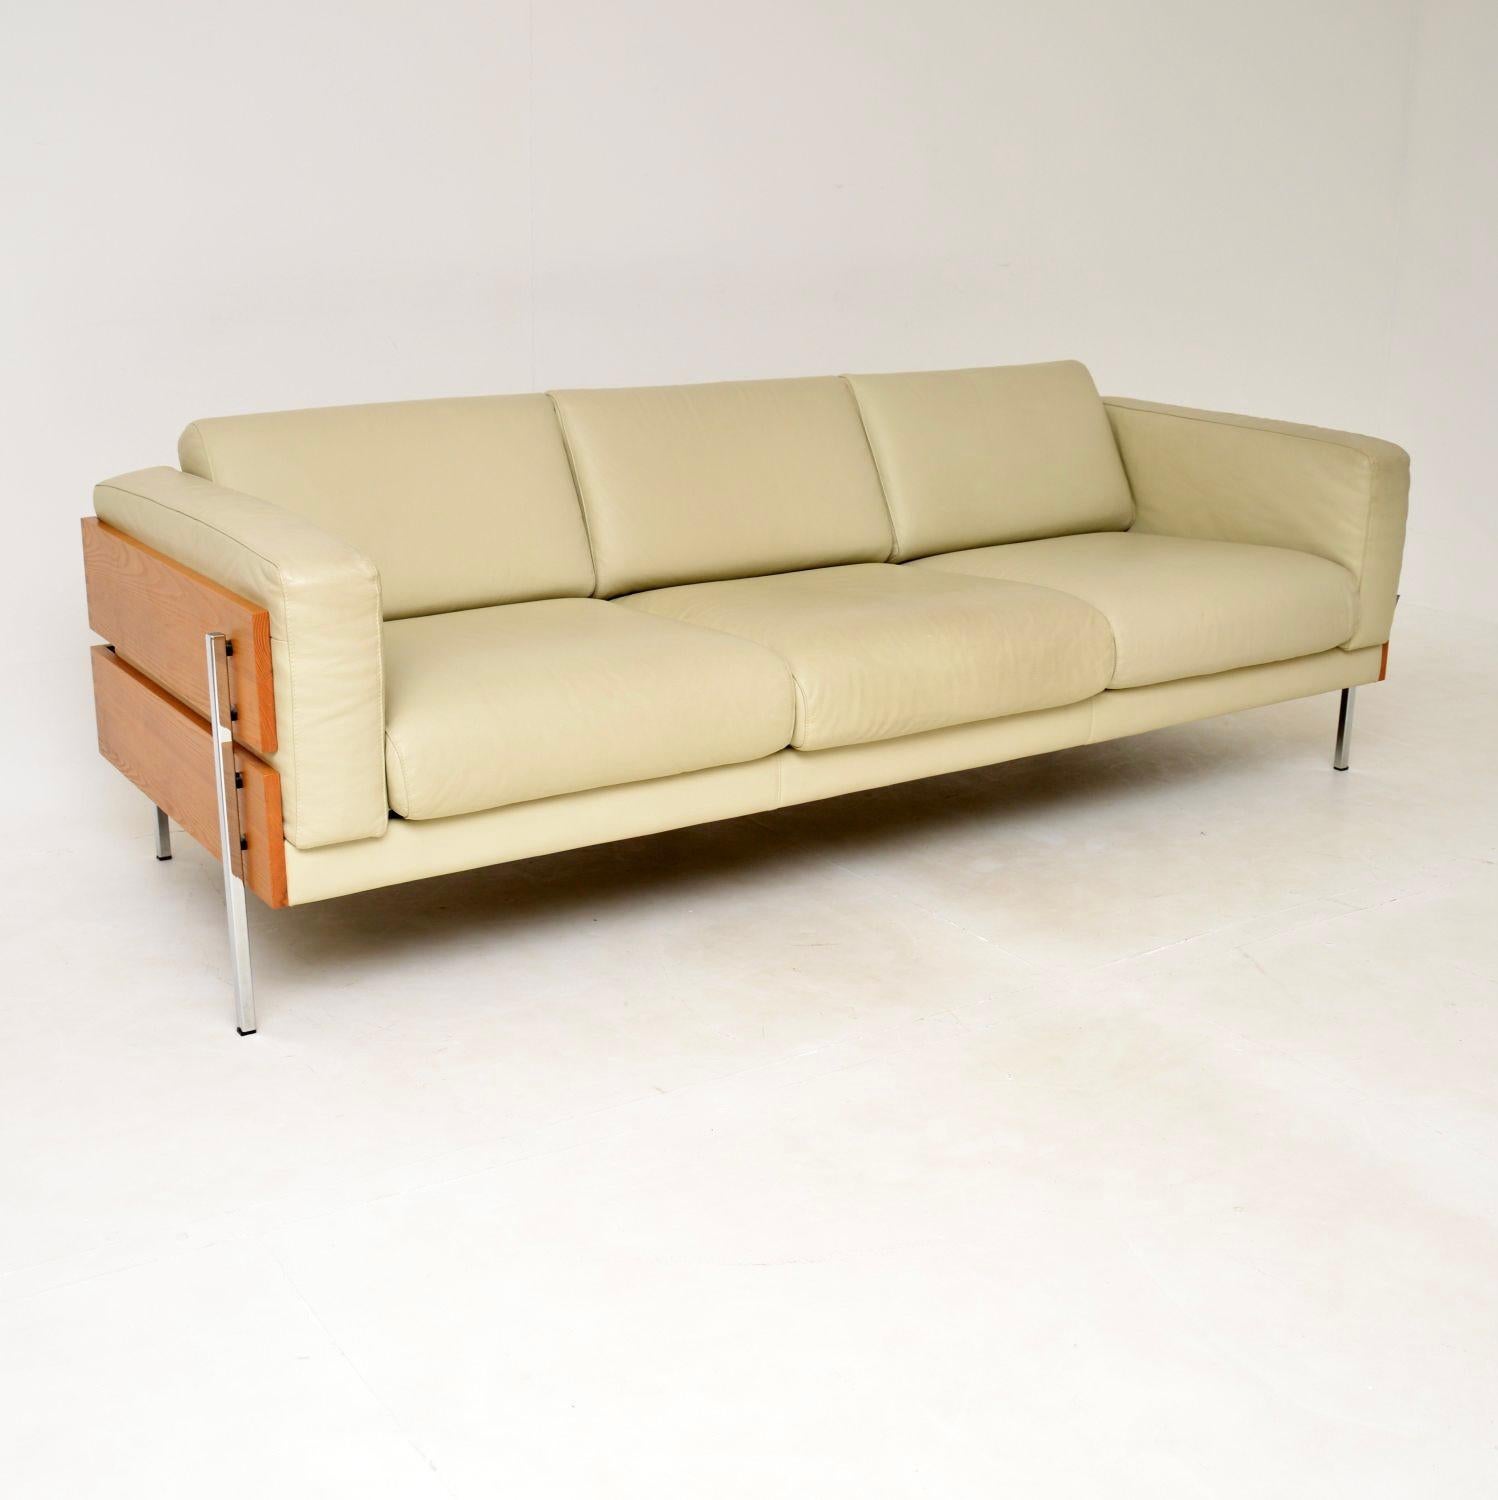 A stunning and iconic design, this is the Forum sofa designed by Robin Day for Hille. Originally designed in 1964, this is a later licensed re-issue by Habitat dating from the late twentieth century.

The quality is exceptional, with a solid oak